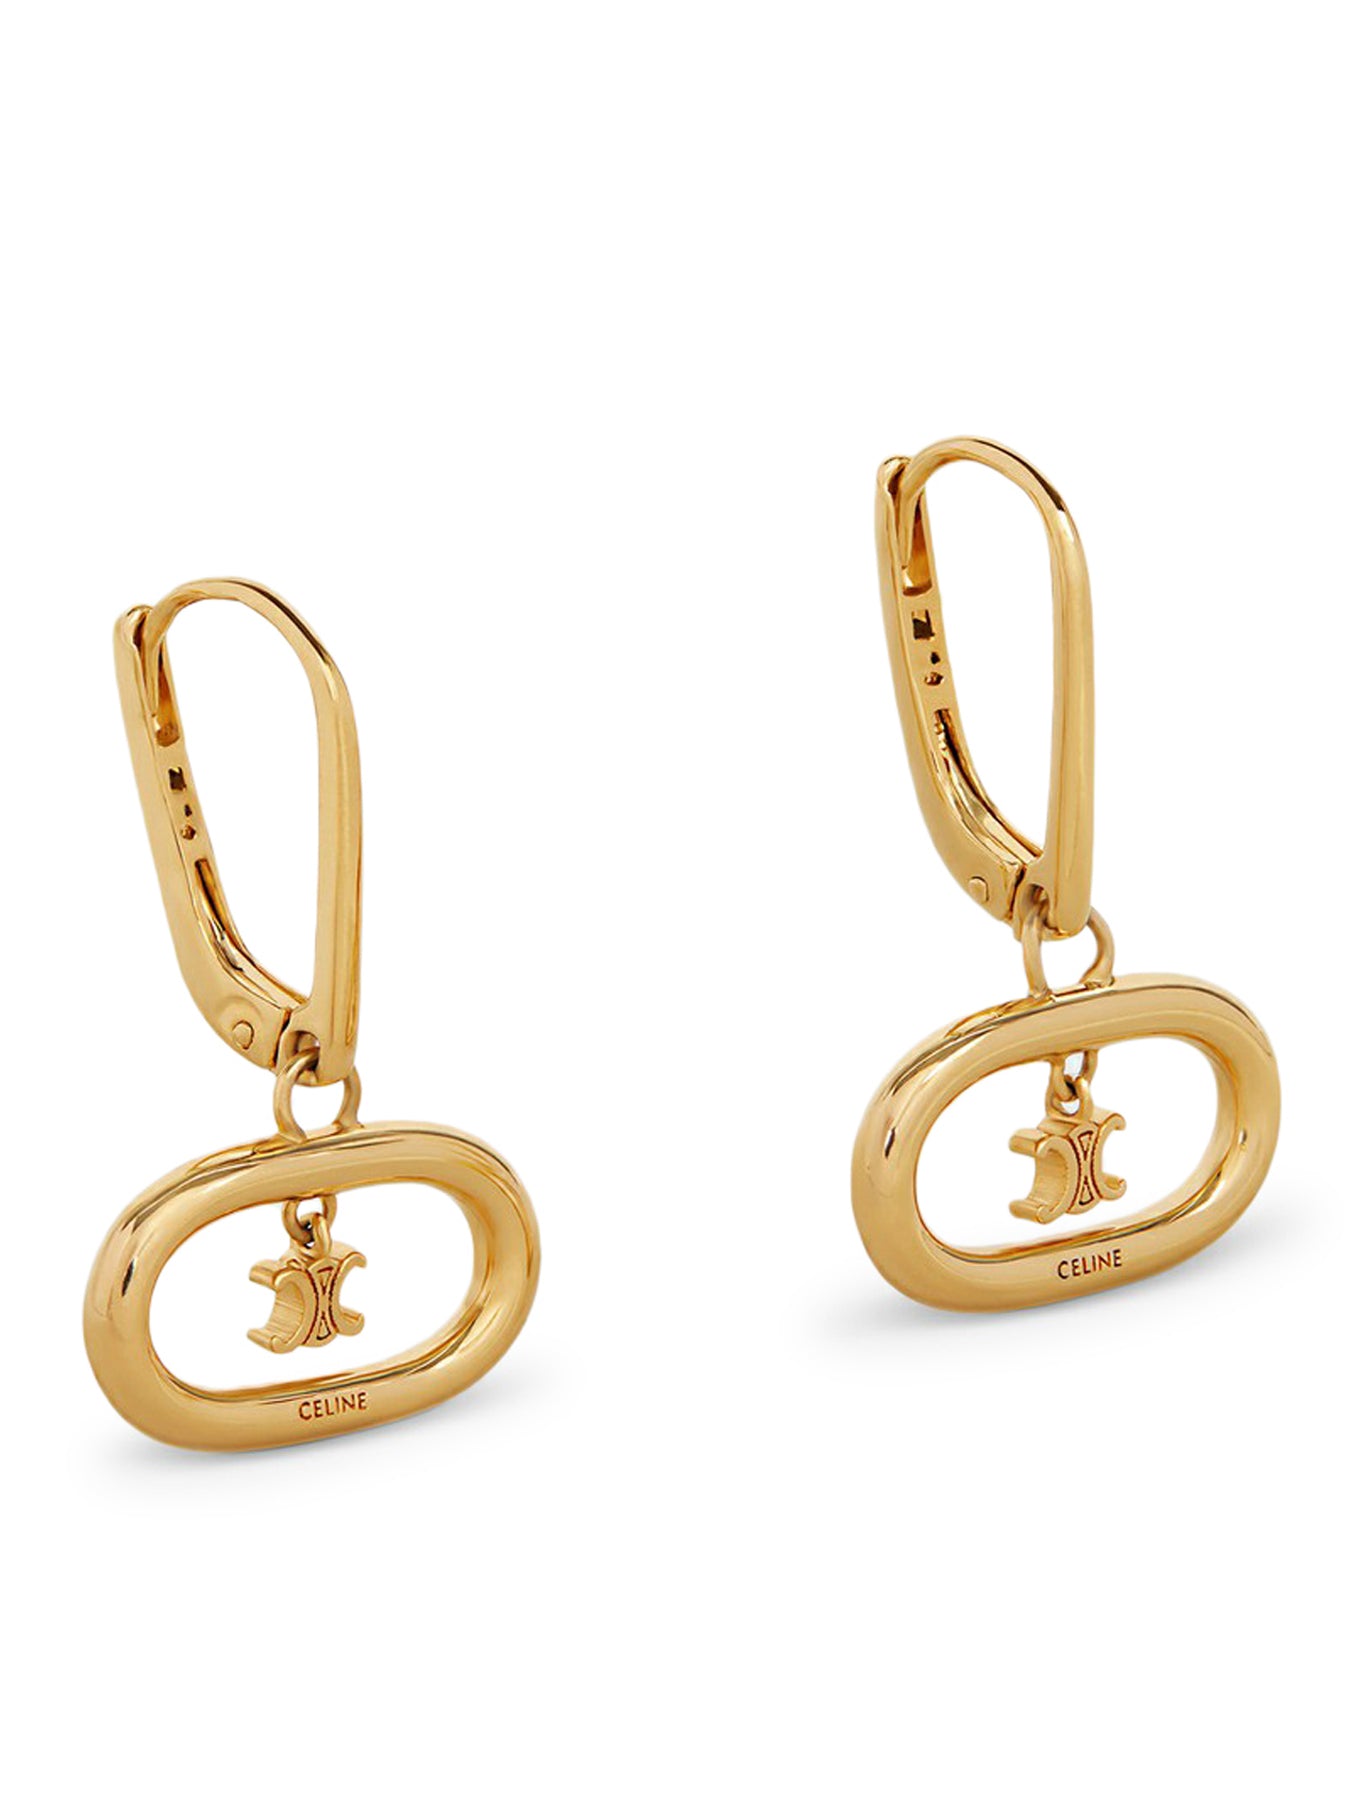 TRIOMPHE MOBILE EARRINGS IN BRASS WITH A GOLD FINISH